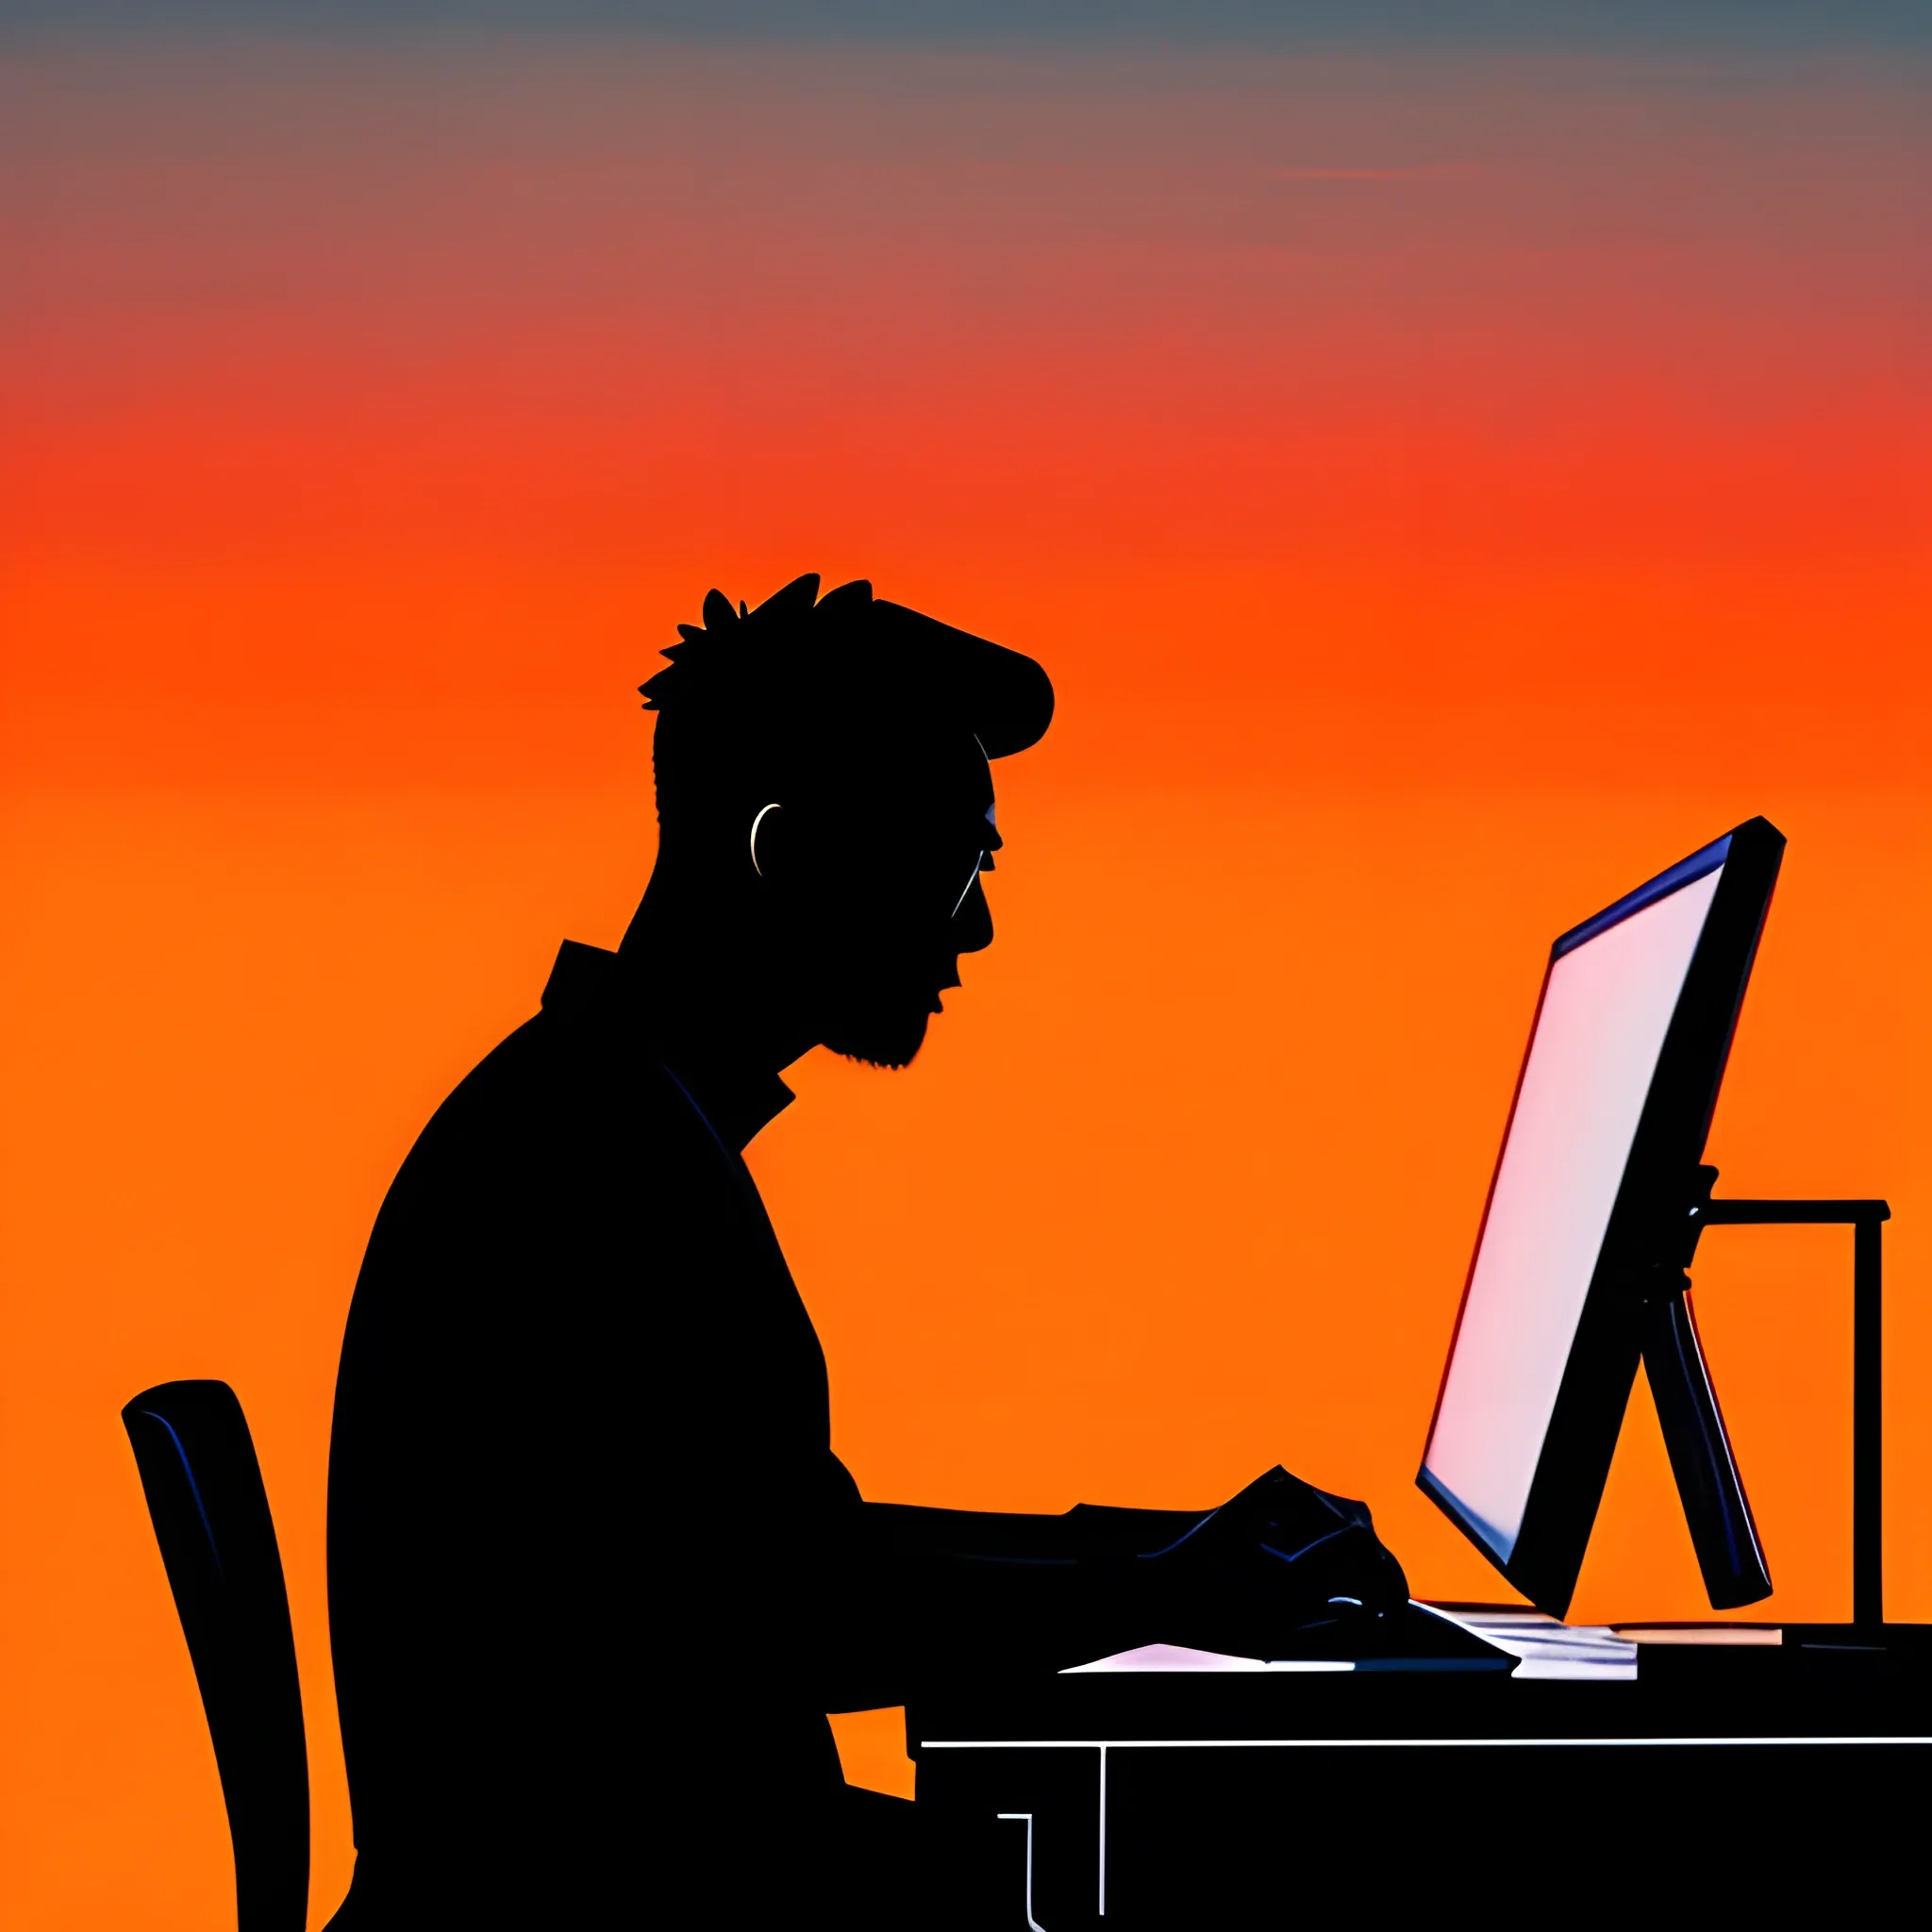 The silhouette of a Chinese boy, crouching on the computer desk and writing code, with a bright backdrop.